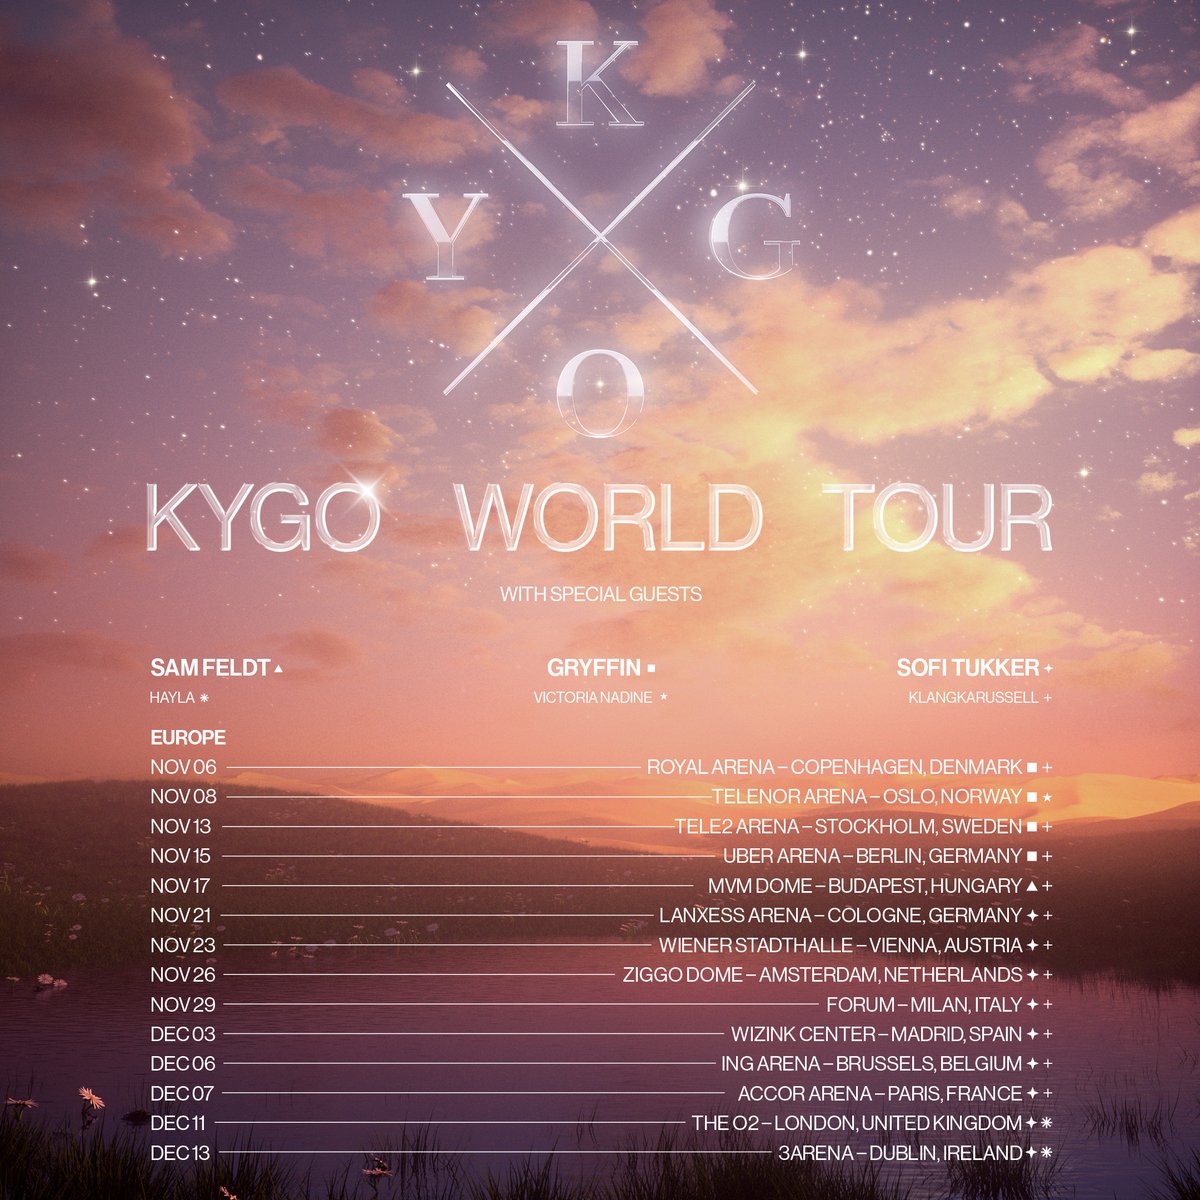 Tickets for our tour with @KygoMusic in Europe this November and December are live!🔥🙌 See you soon w/ @Klangkarussell & @haylasings! tix: sofitukker.com/tour @ZiggoDome #TheO2London @LANXESSarena @ingarenabxl @Accor_Arena @WiZinkCenter @StadthalleWien @3ArenaDublin